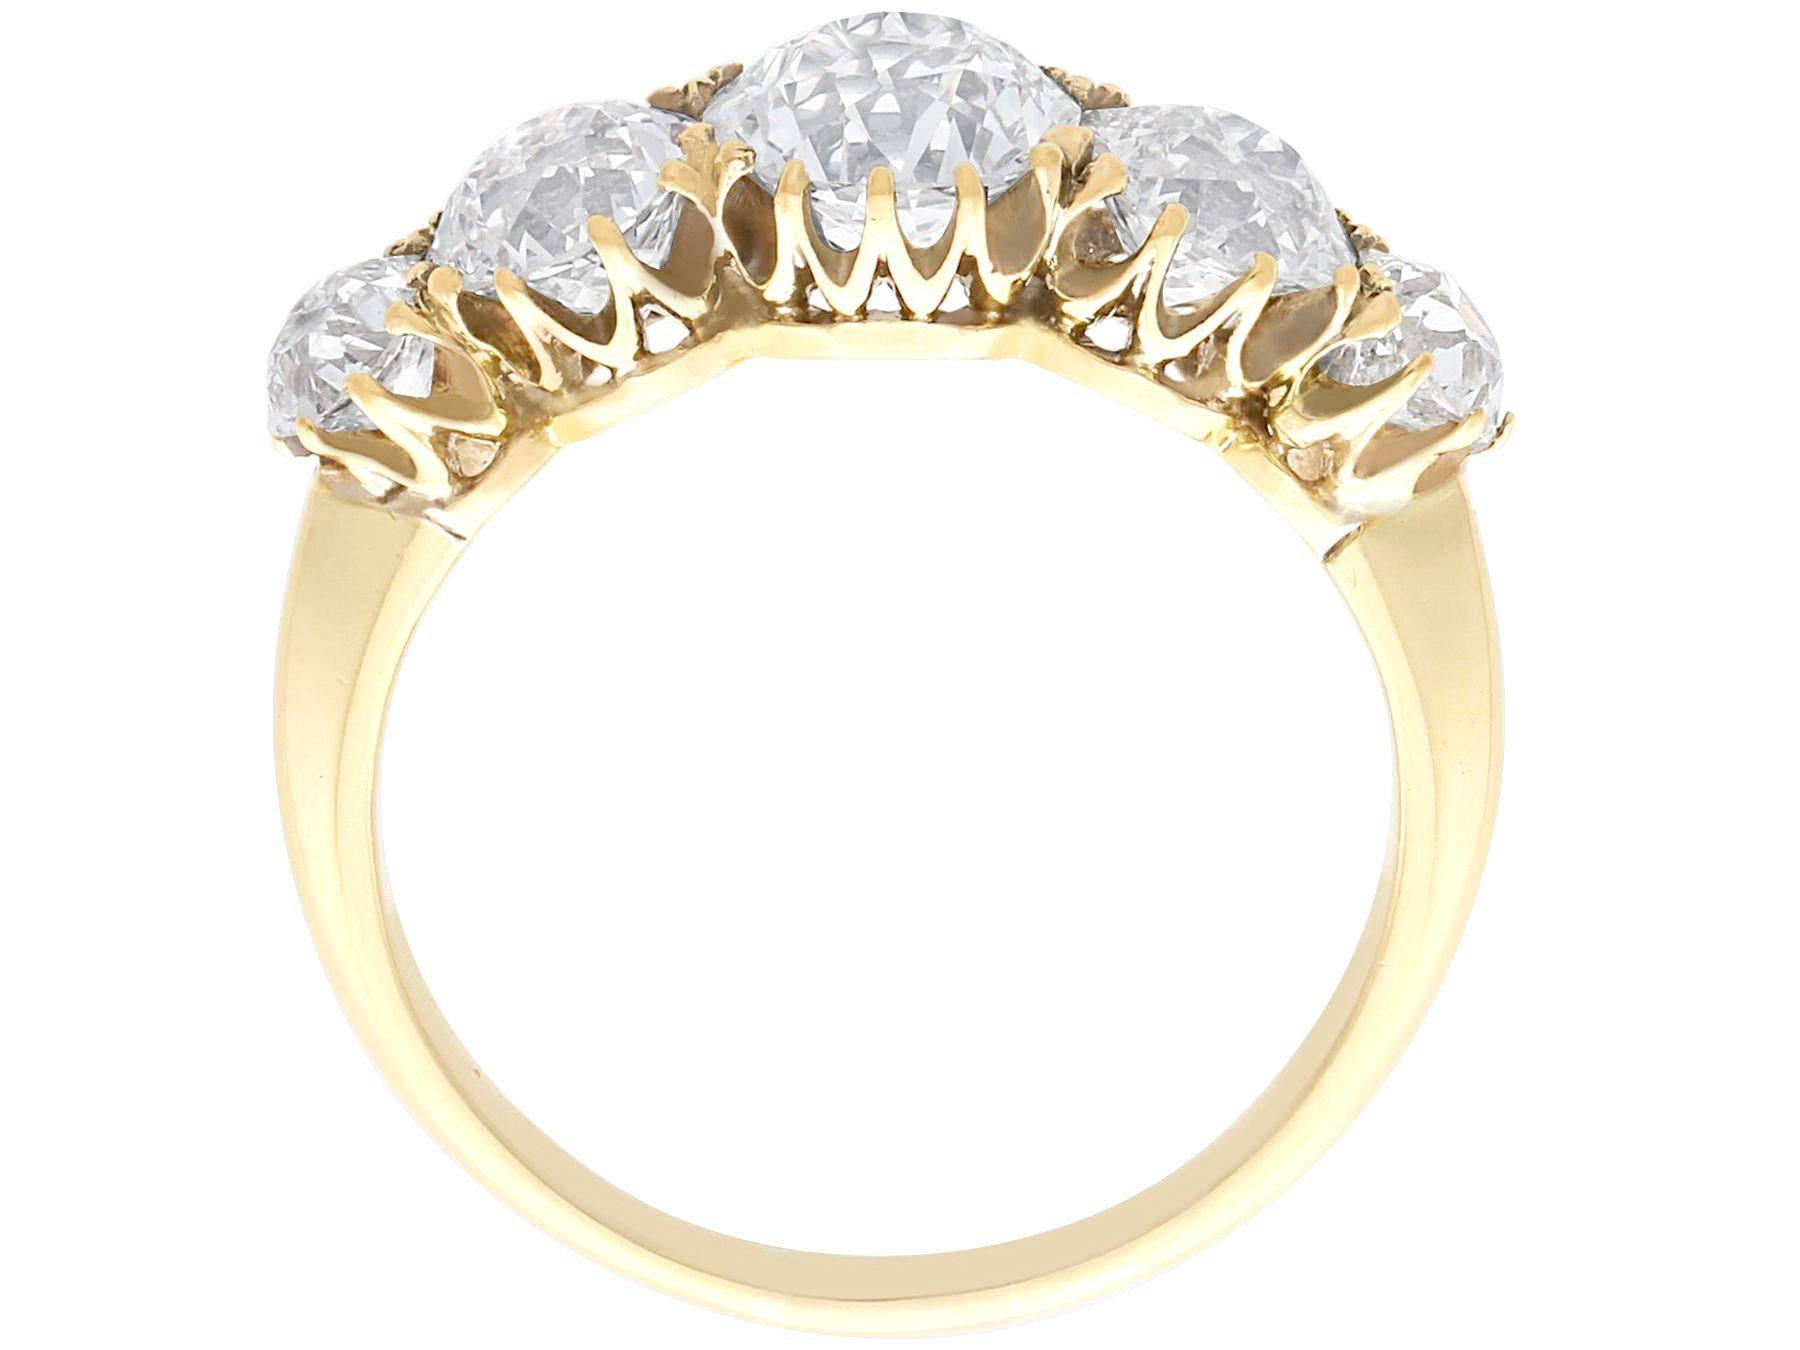 Women's or Men's Antique 3.29 Carat Diamond and Yellow Gold Five Stone Ring